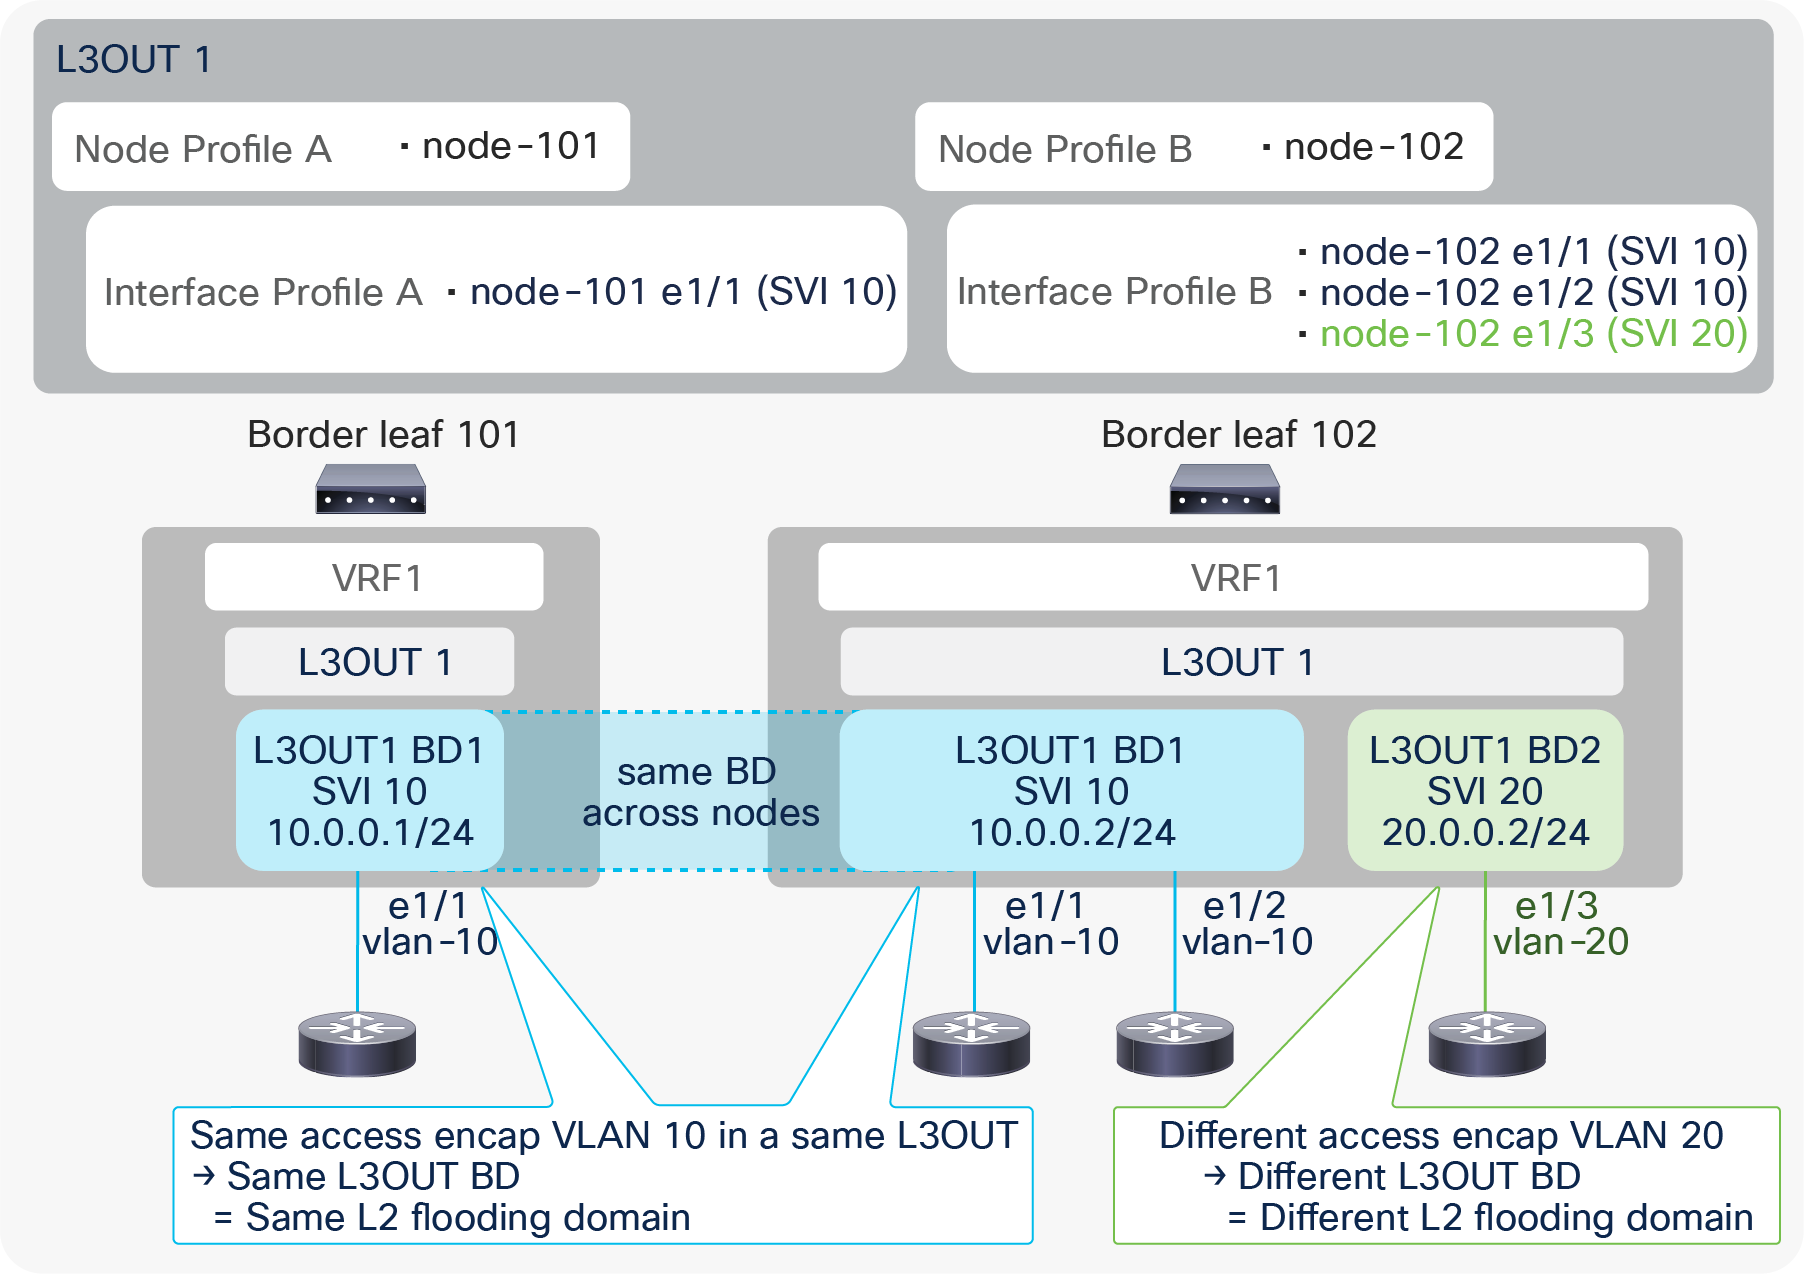 L3Out BD and access-encap VLAN (in the same L3Out)